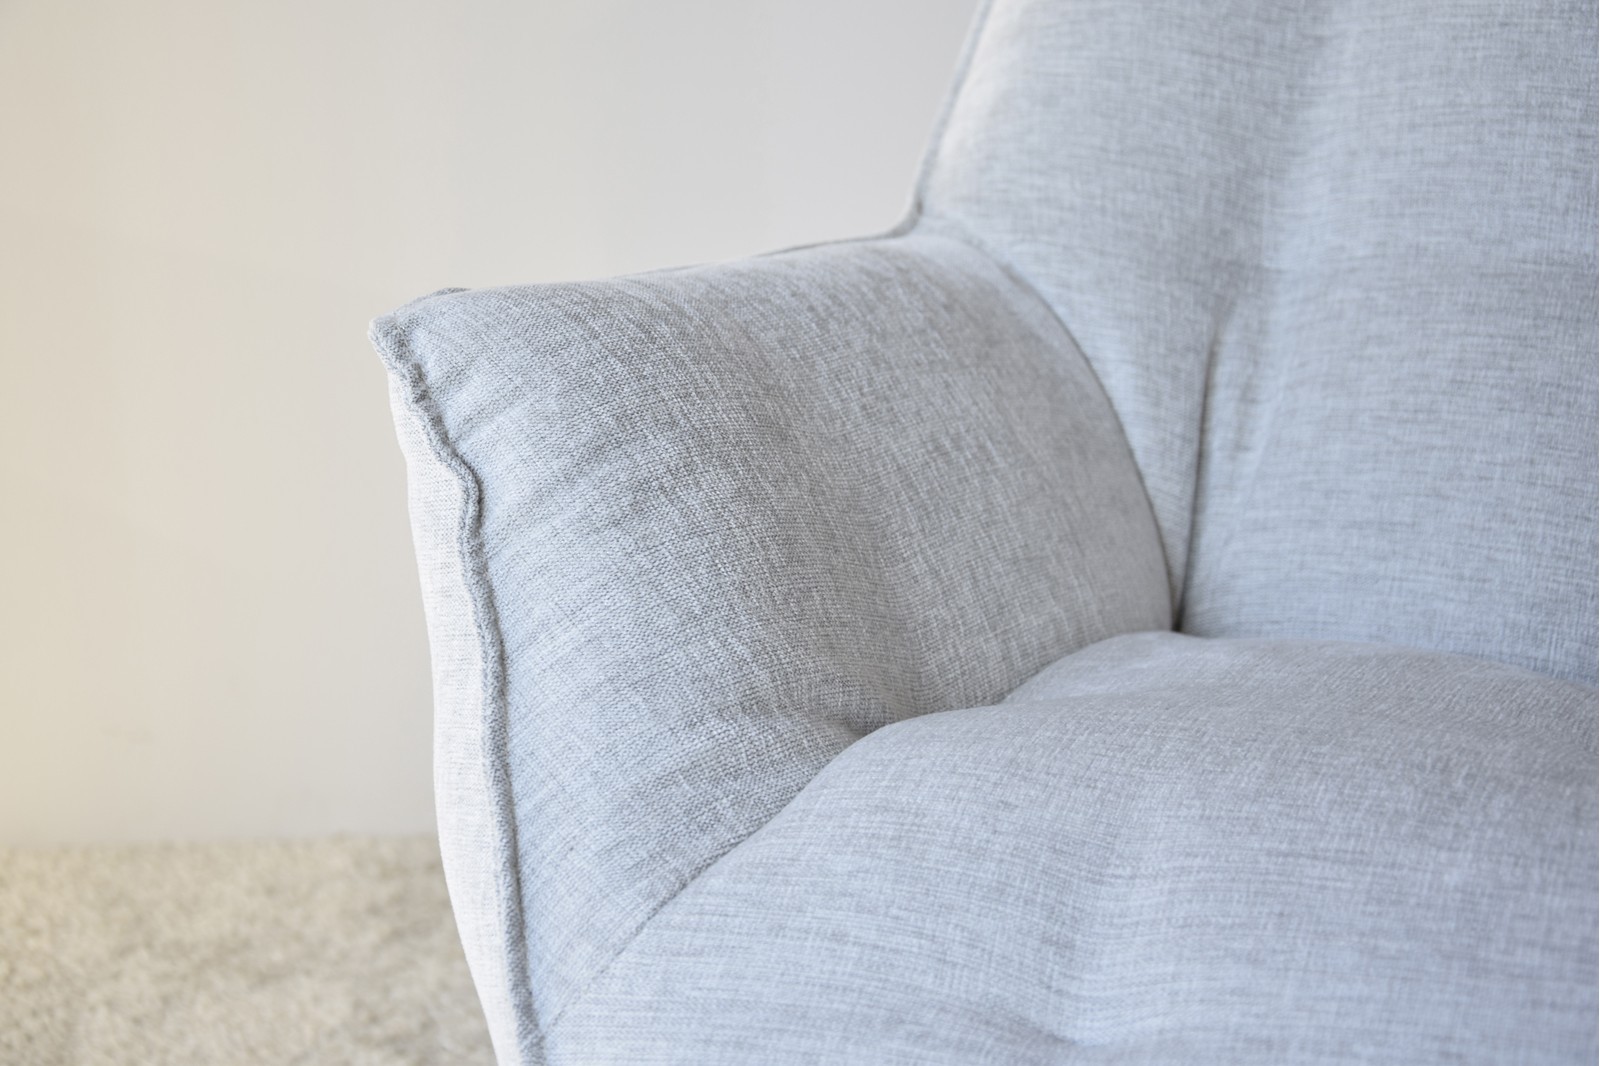 ARMCHAIR. HIGH BACKREST AND SOFT GREY TONES